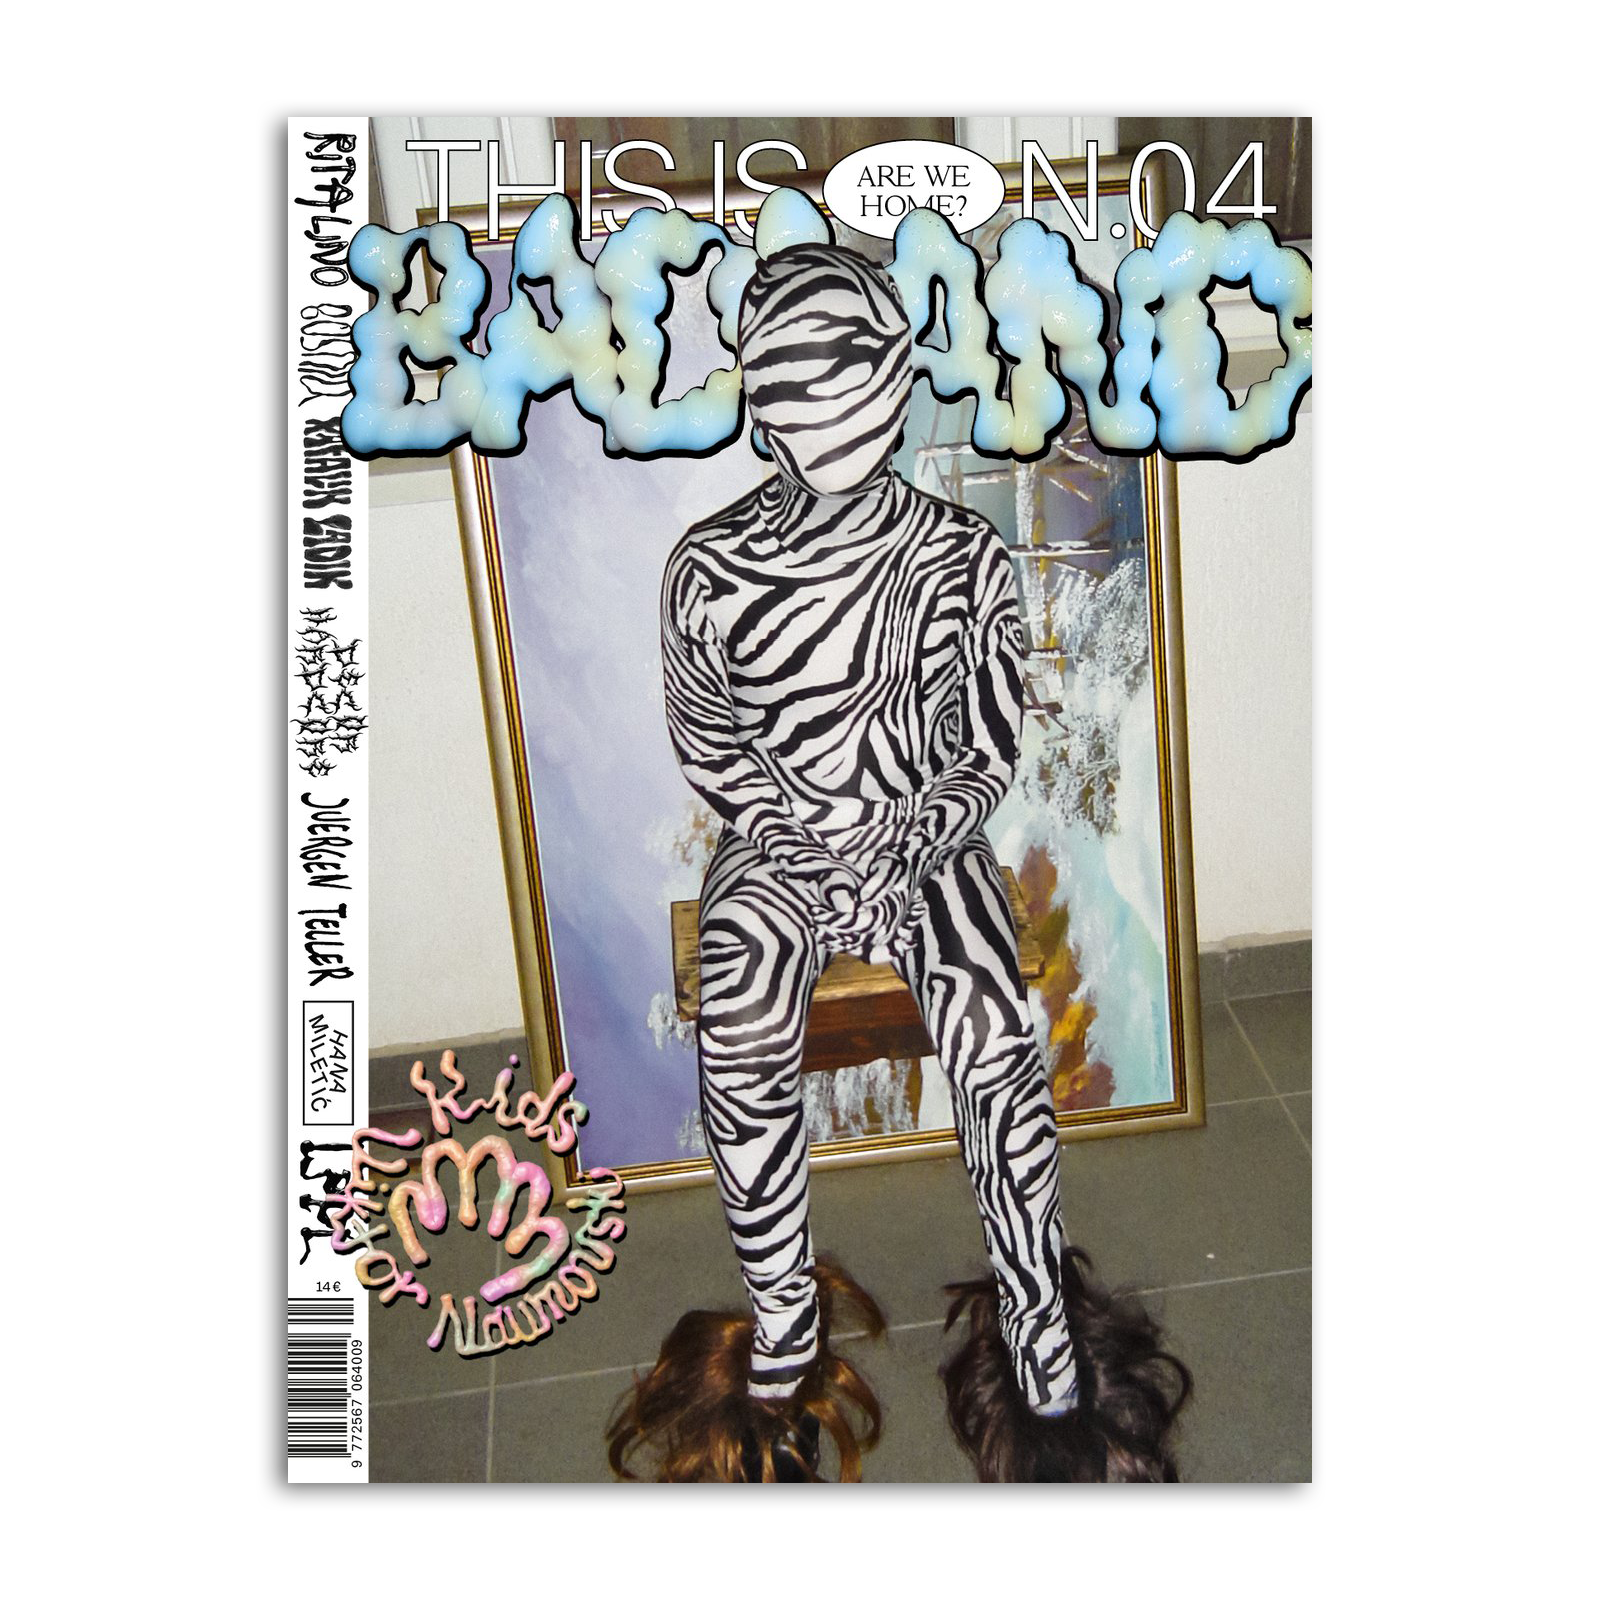 This is Badland Issue N.04 - Are We Home?